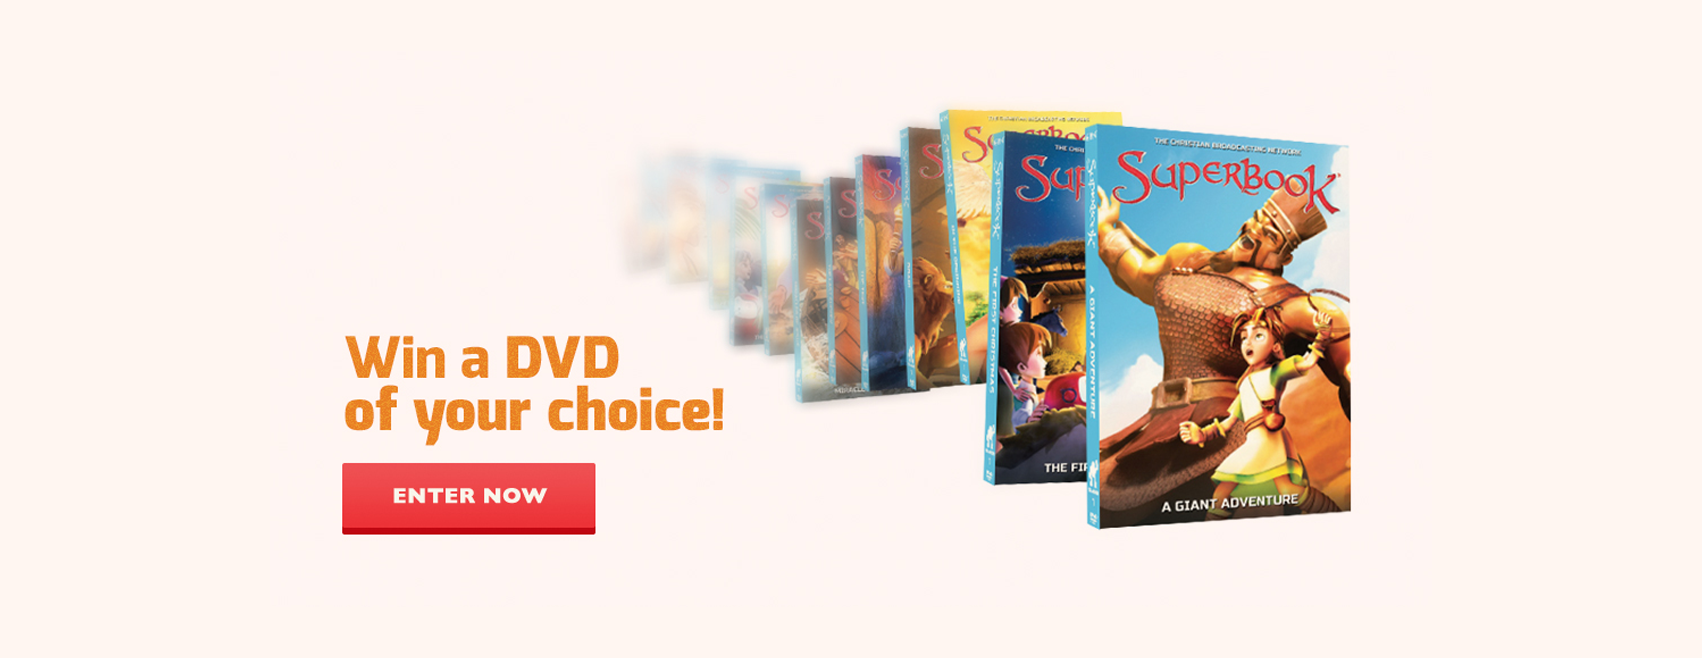 Win Your Choice DVD!